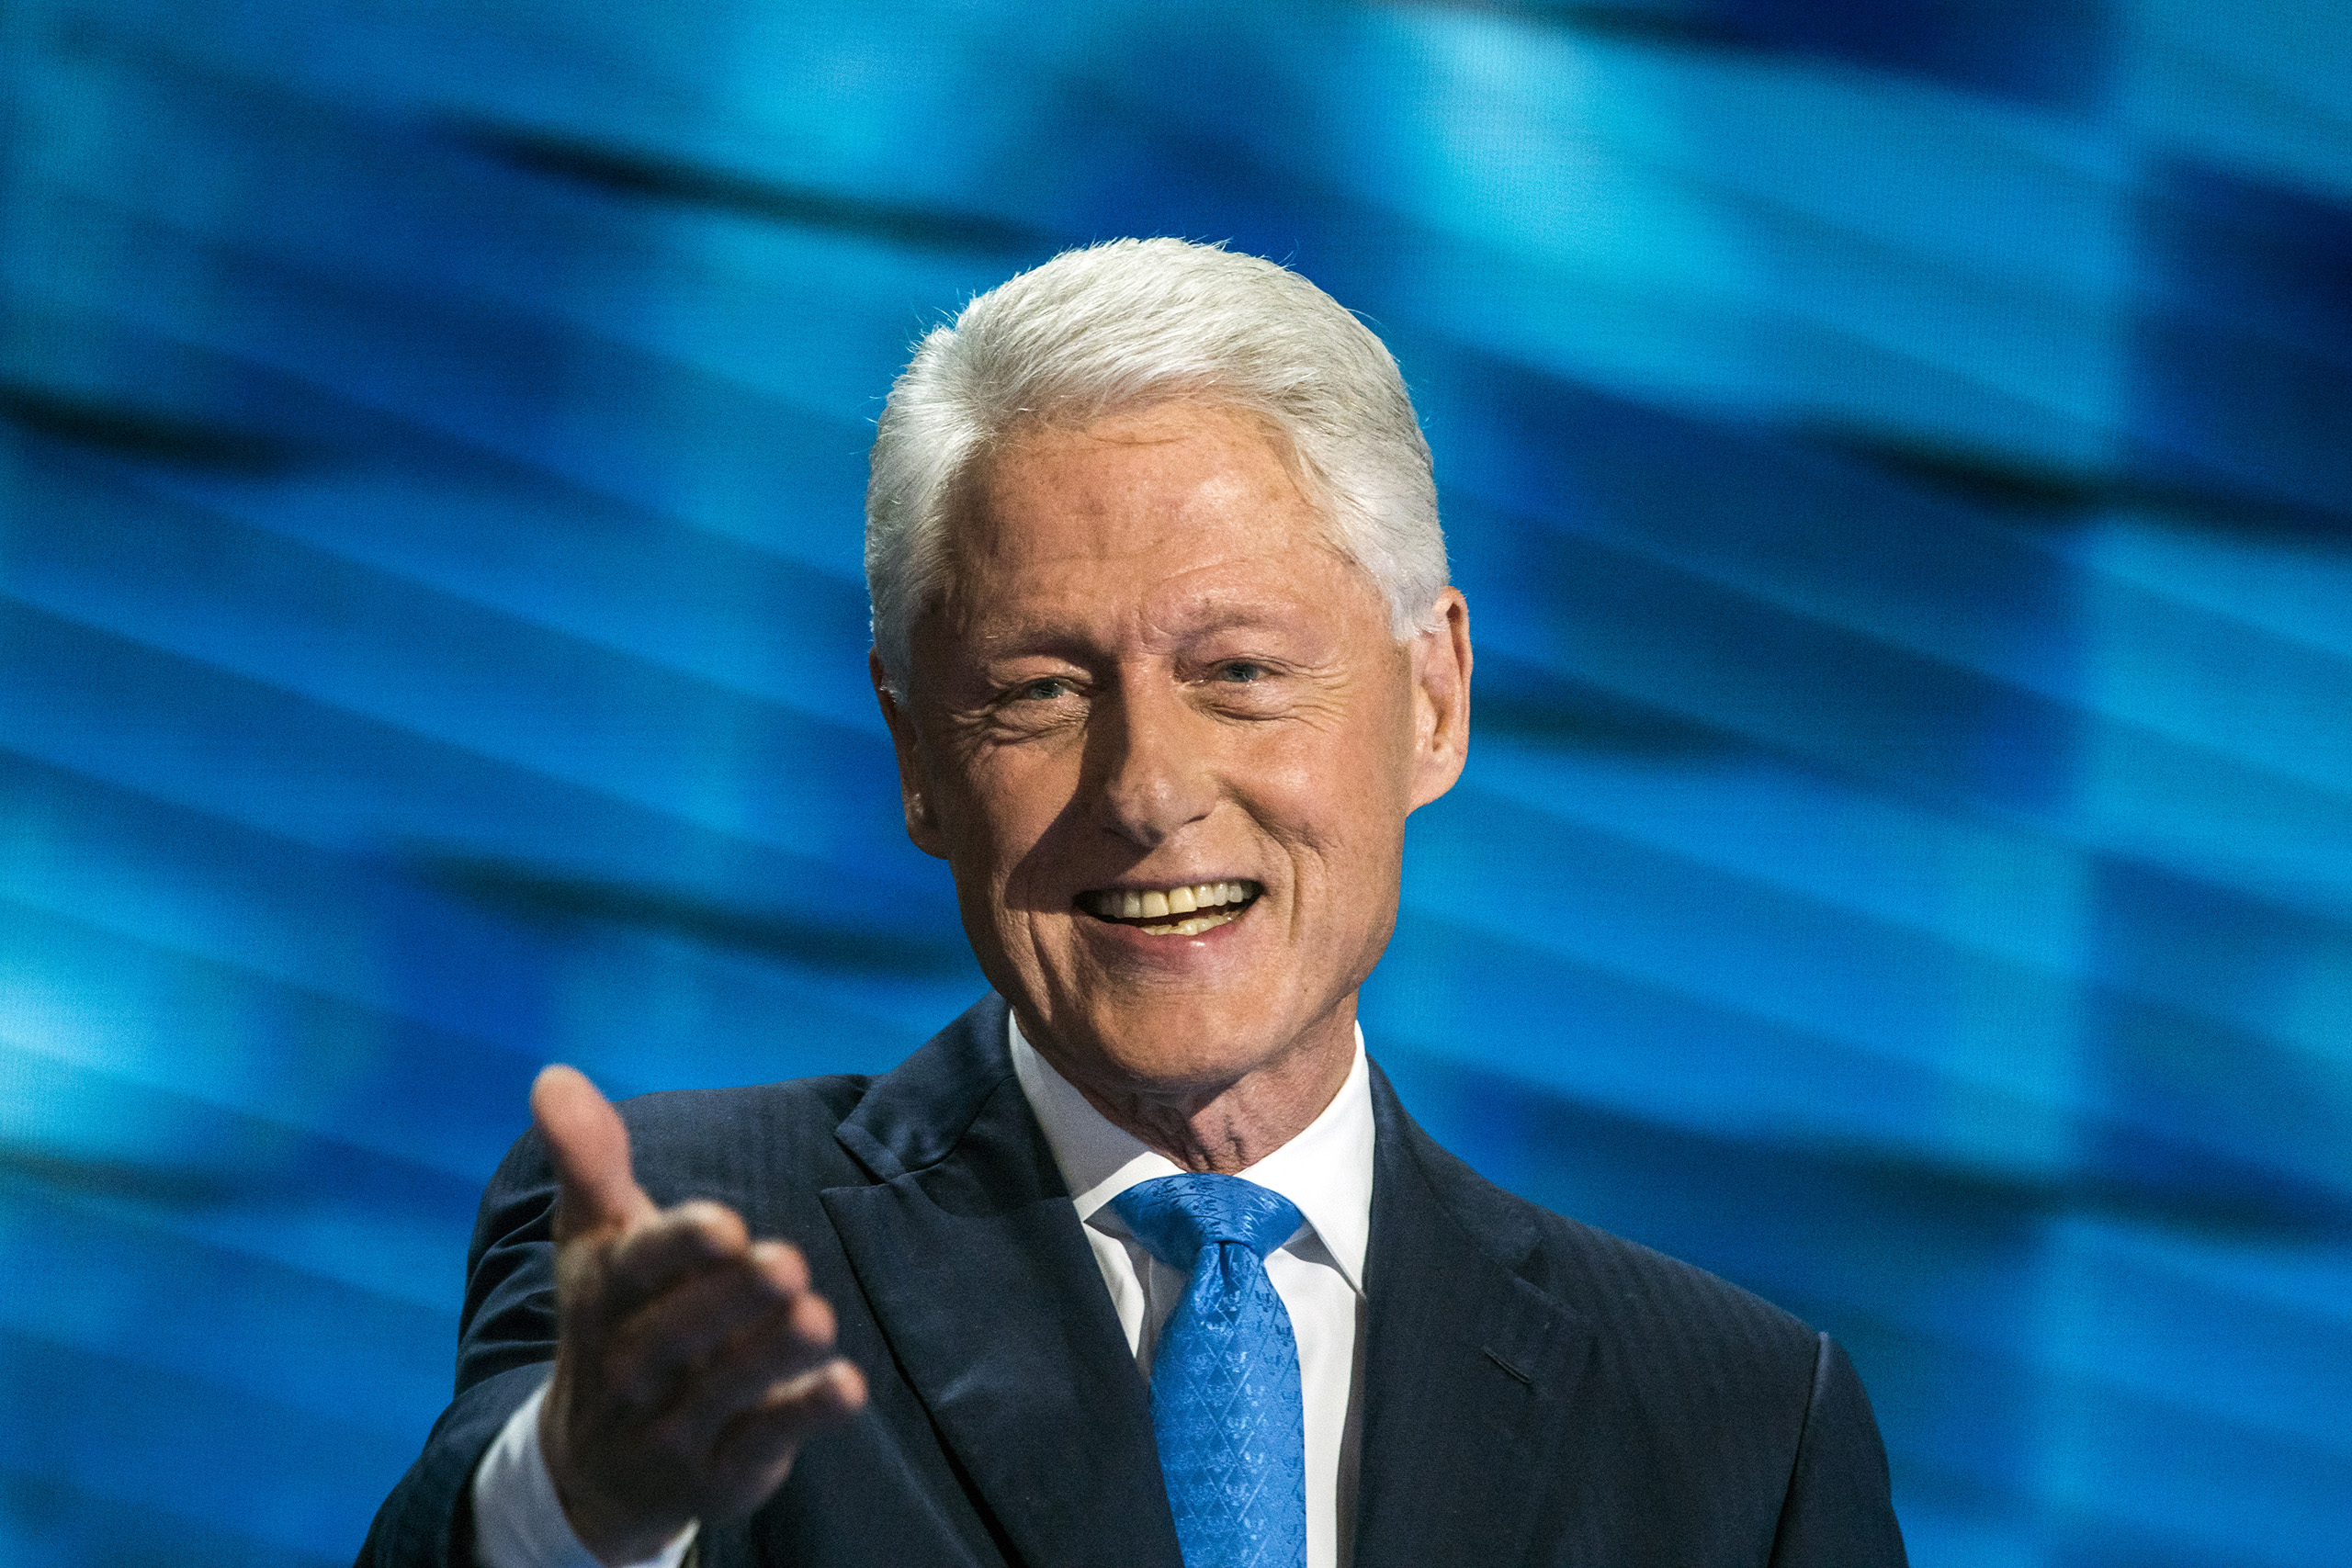 Former US President Bill Clinton speaks on the second day of the Democratic National Convention at the Wells Fargo Center, July 26, 2016 in Philadelphia, Pennsylvania. (Ben Lowy for TIME)